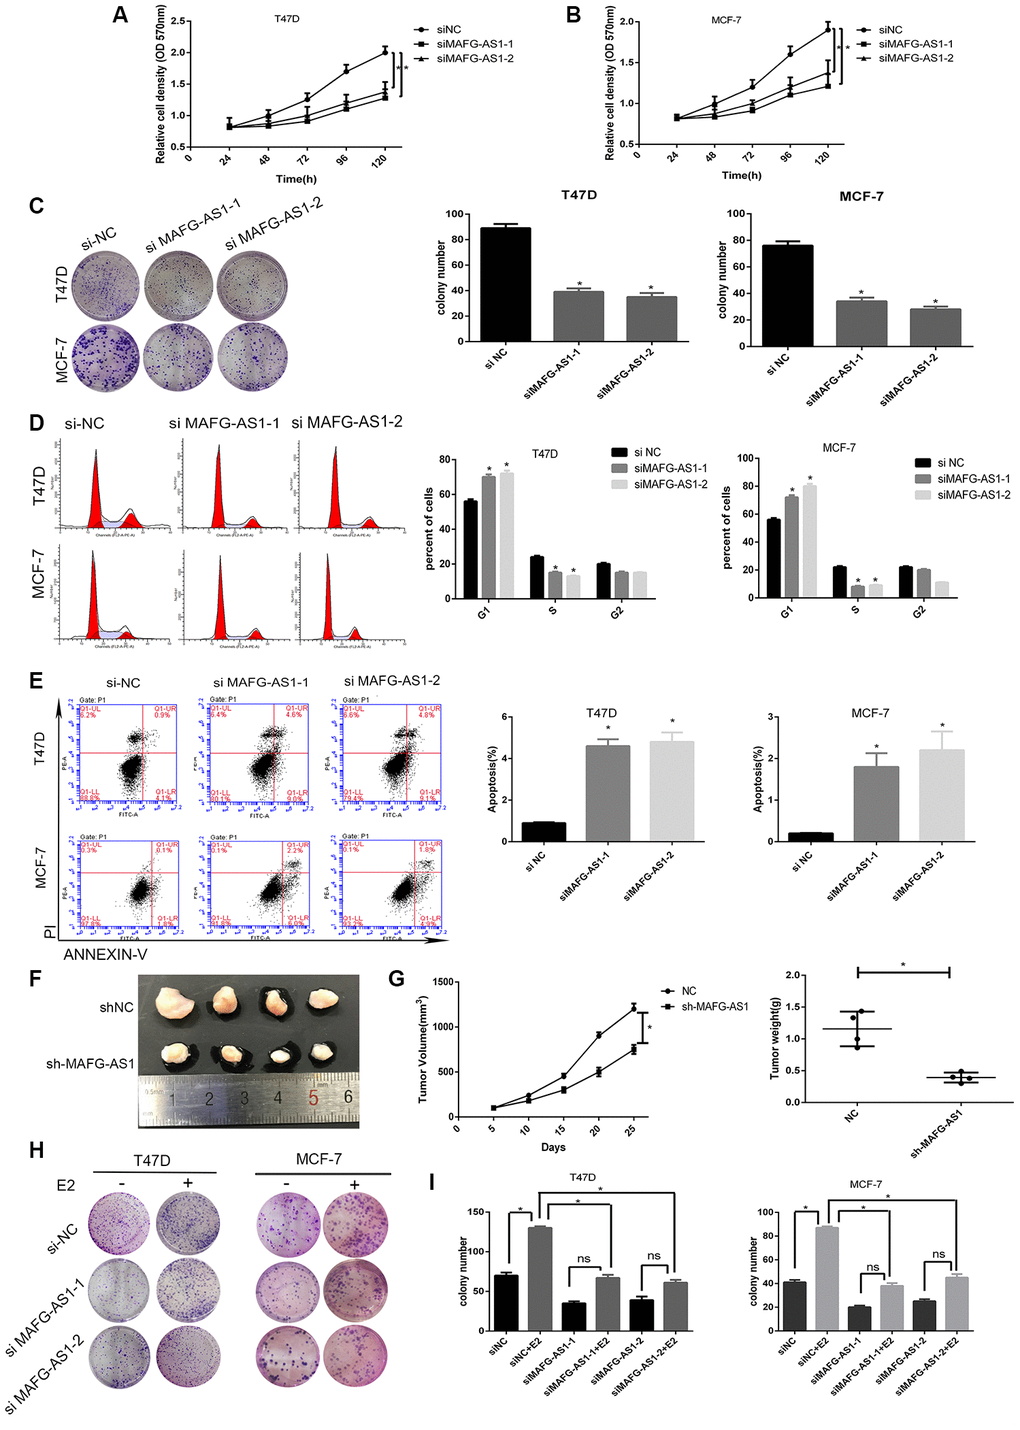 lncRNA MAFG-AS1 promotes the development of ER+ breast cancer through cell cycle and apoptosis. (A, B) Knockdown of MAFG-AS1 significantly decreased cell proliferation compared with si-NC cells in T47D and MCF-7 cell lines by MTT assay. (C) Colony formation number of T47D and MCF-7 cells transfected with si-MAFG-AS1 were significantly less than those transfected with si-NC. (D) MAFG-AS1 promoted cell cycle from G1 to S phase by flow cytometry. (E) MAFG-AS1 promoted antiapoptosis by Annexin-V/FITC double staining on cell apoptosis; the bar graph presents the percentage of apoptotic cells. (F) Tumor images of MCF-7-shNC and MCF-7-shMAFG-AS1 cells which were infected with lentiviruses carrying the indicated expression constructs injected into female nude mice pad for in situ tumor formation. (G) Tumor volume (left) and weight (right) in the sh-MAFG-AS1 group were significantly lower than those in the sh-NC group. (H, I) Colony formation of E2 combined with or without knocking down MAFG-AS1. Data are presented as the mean±SD of three independent experiments. *p